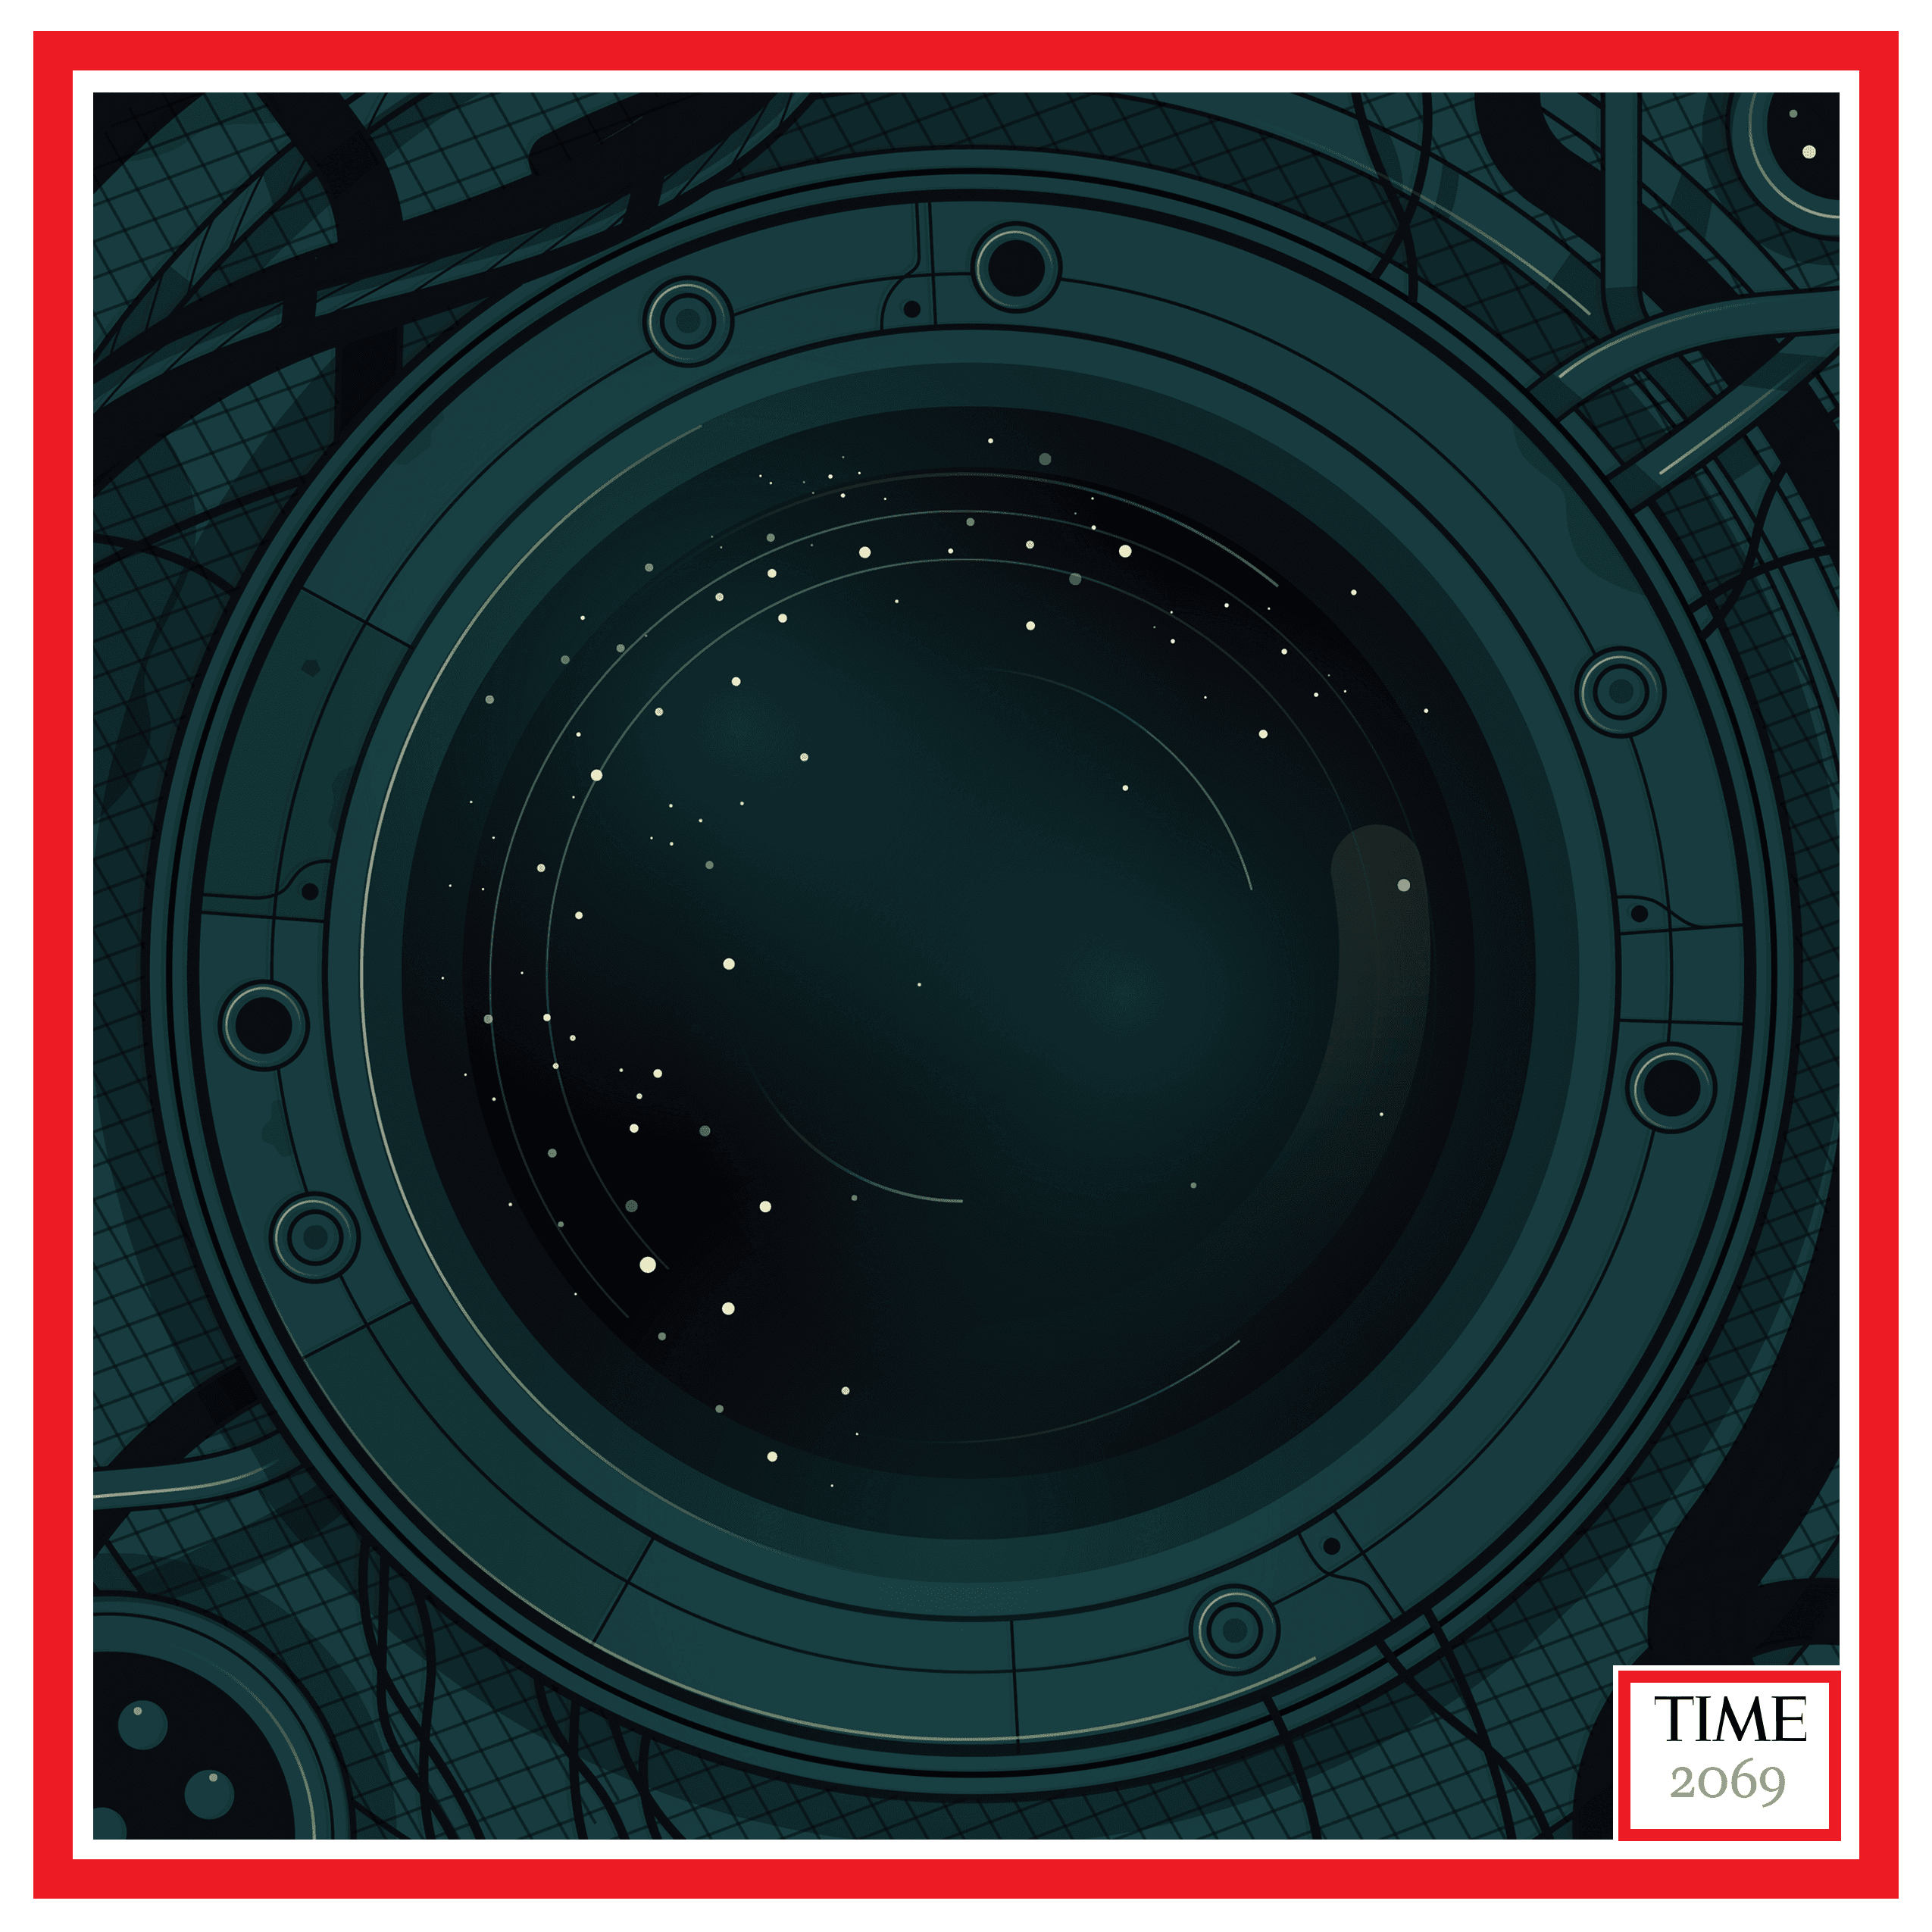 Porthole, 2069 by Harry Campbell